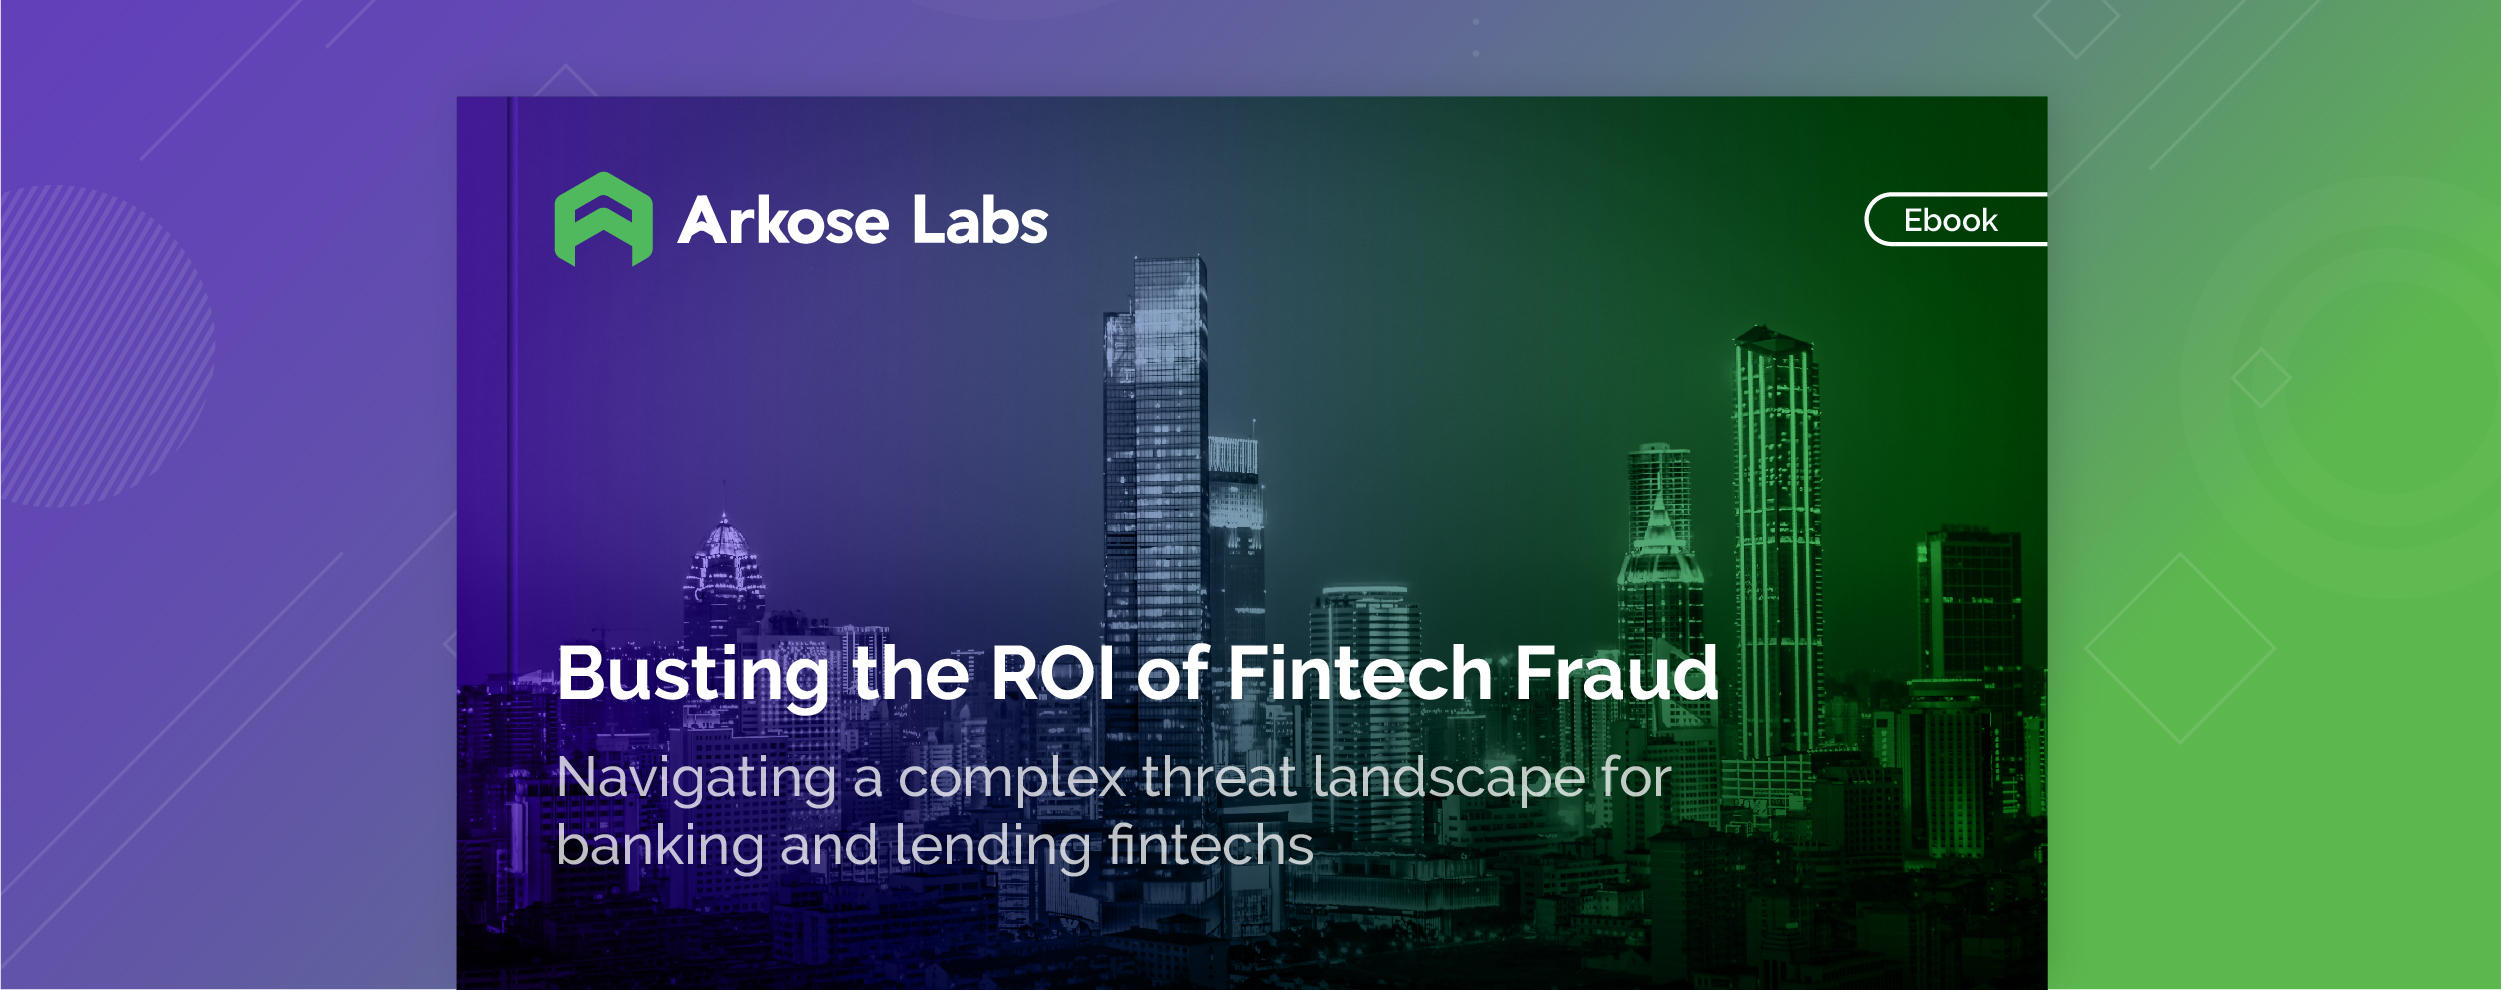 Busting the ROI of Fintech Fraud